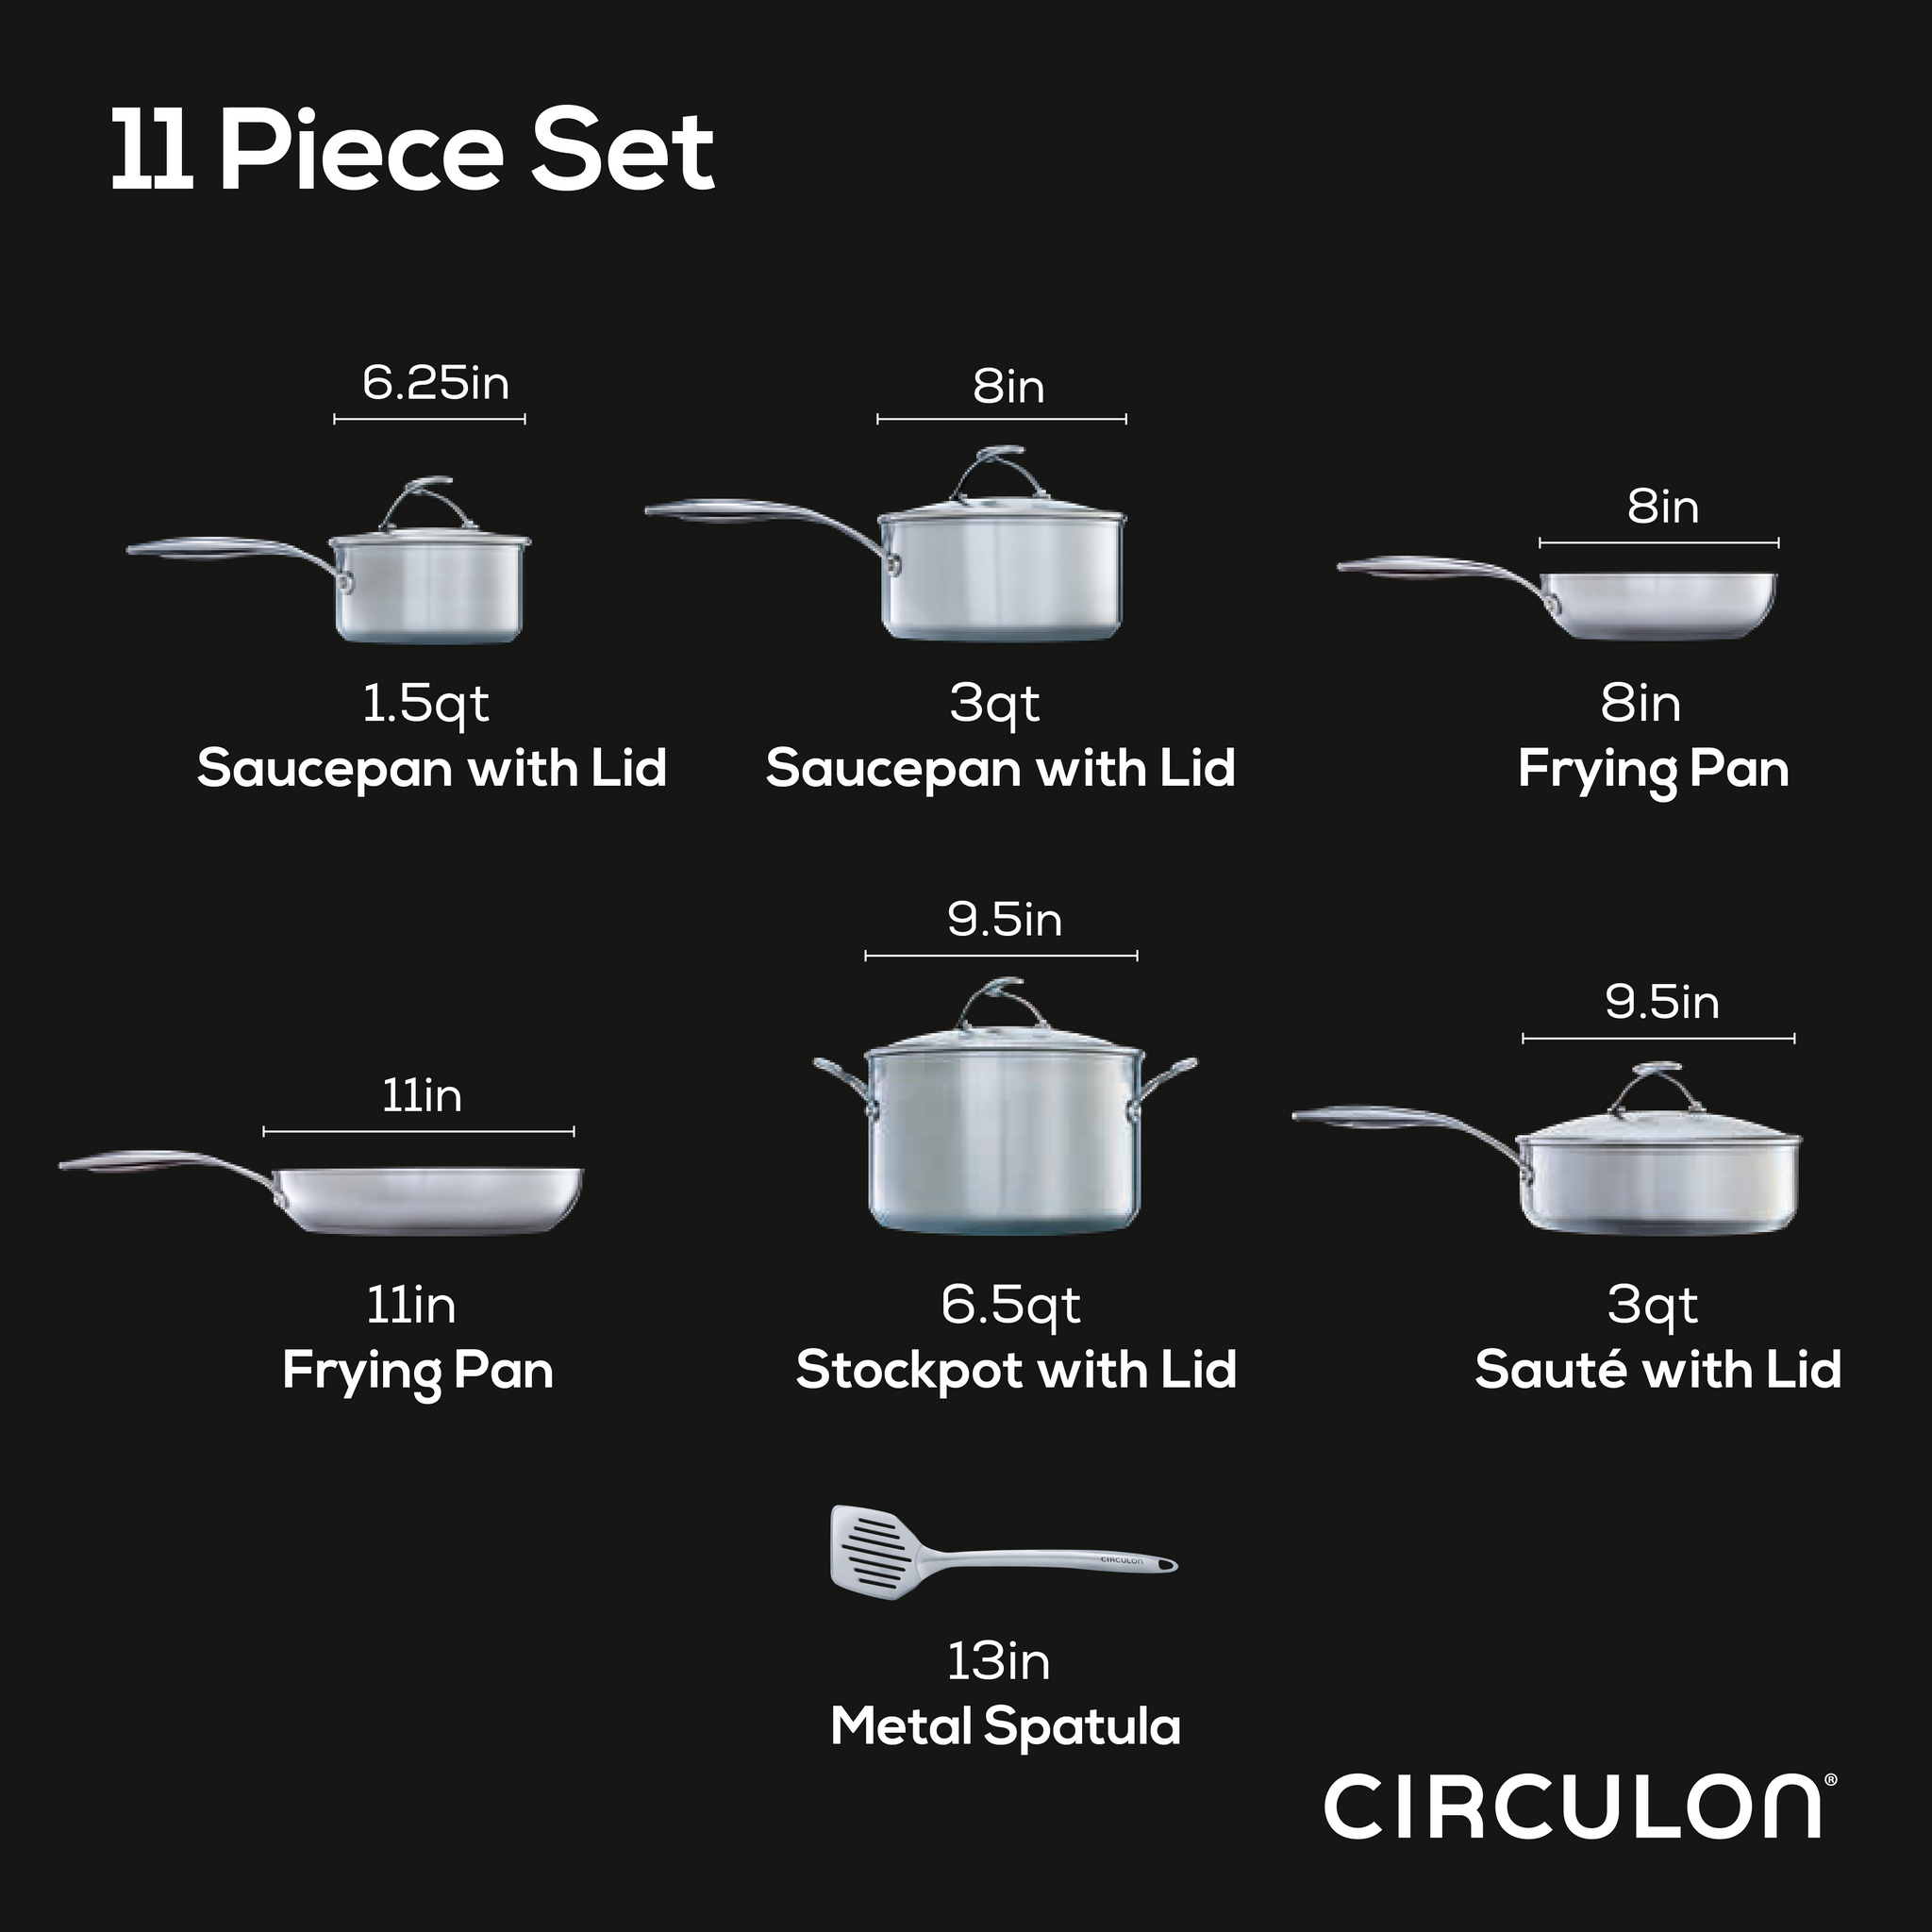 1.5 Quart Hybrid Stainless Steel Pot Saucepan With Glass Lid